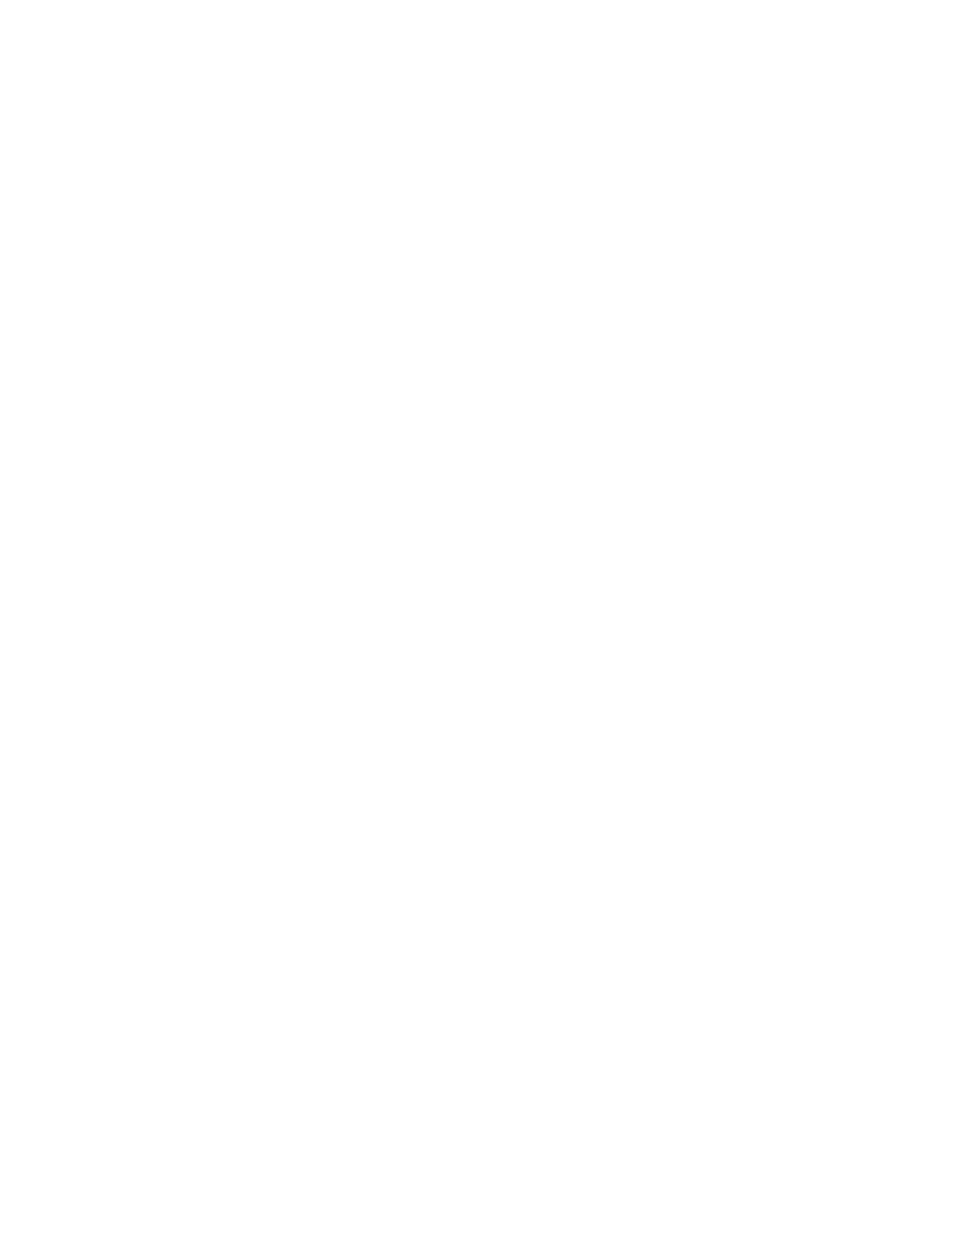 Download Light-bg - Gradient Black To White Center PNG Image with No  Background 